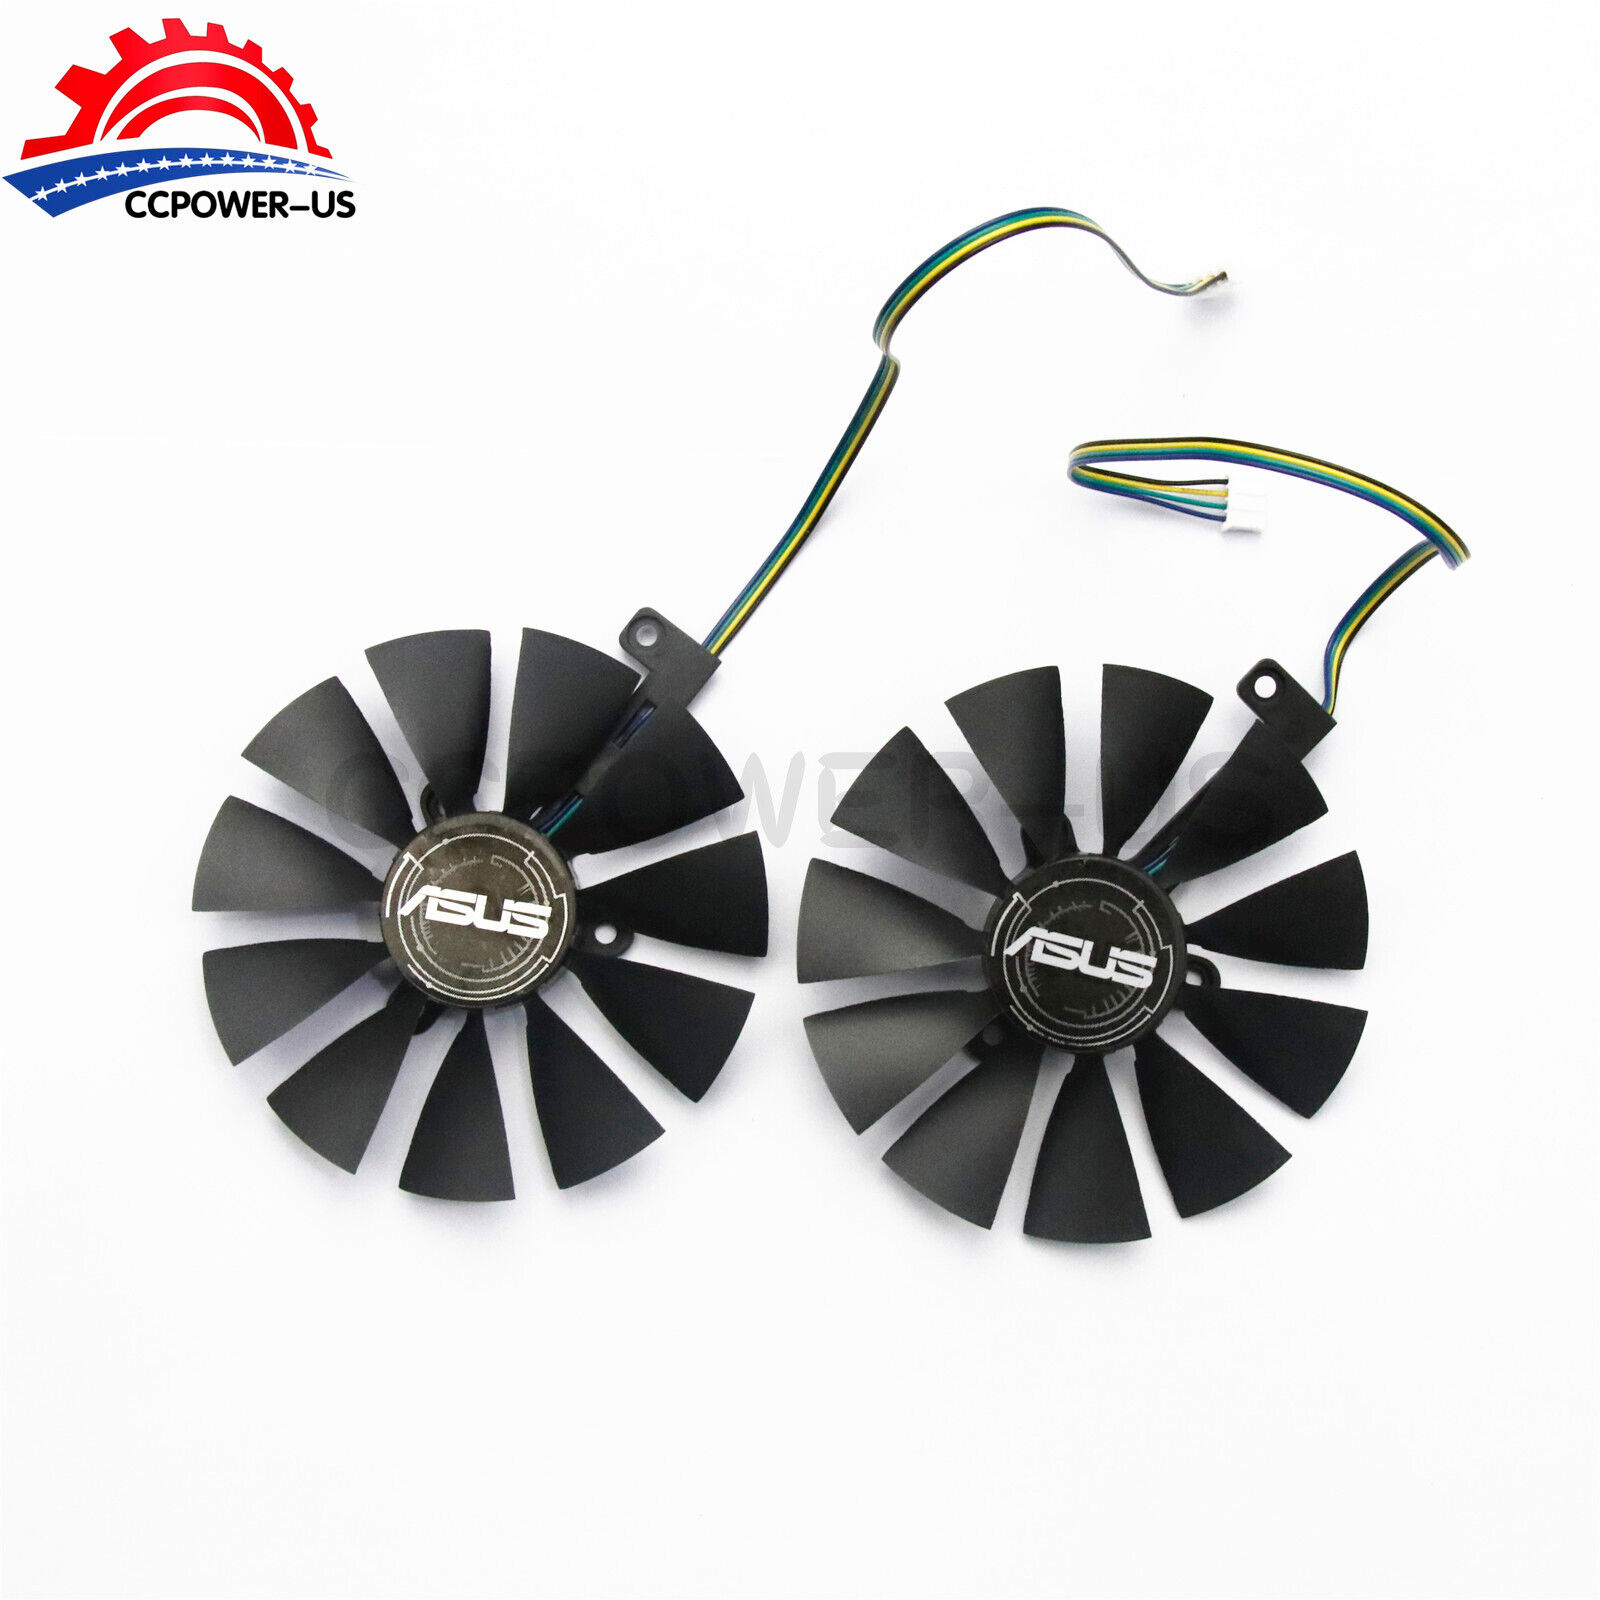 NEW Graphics Card Fan For ASUS Dual GeForce RTX 2080 RTX 2070 RTX 2060 88mm 4PIN